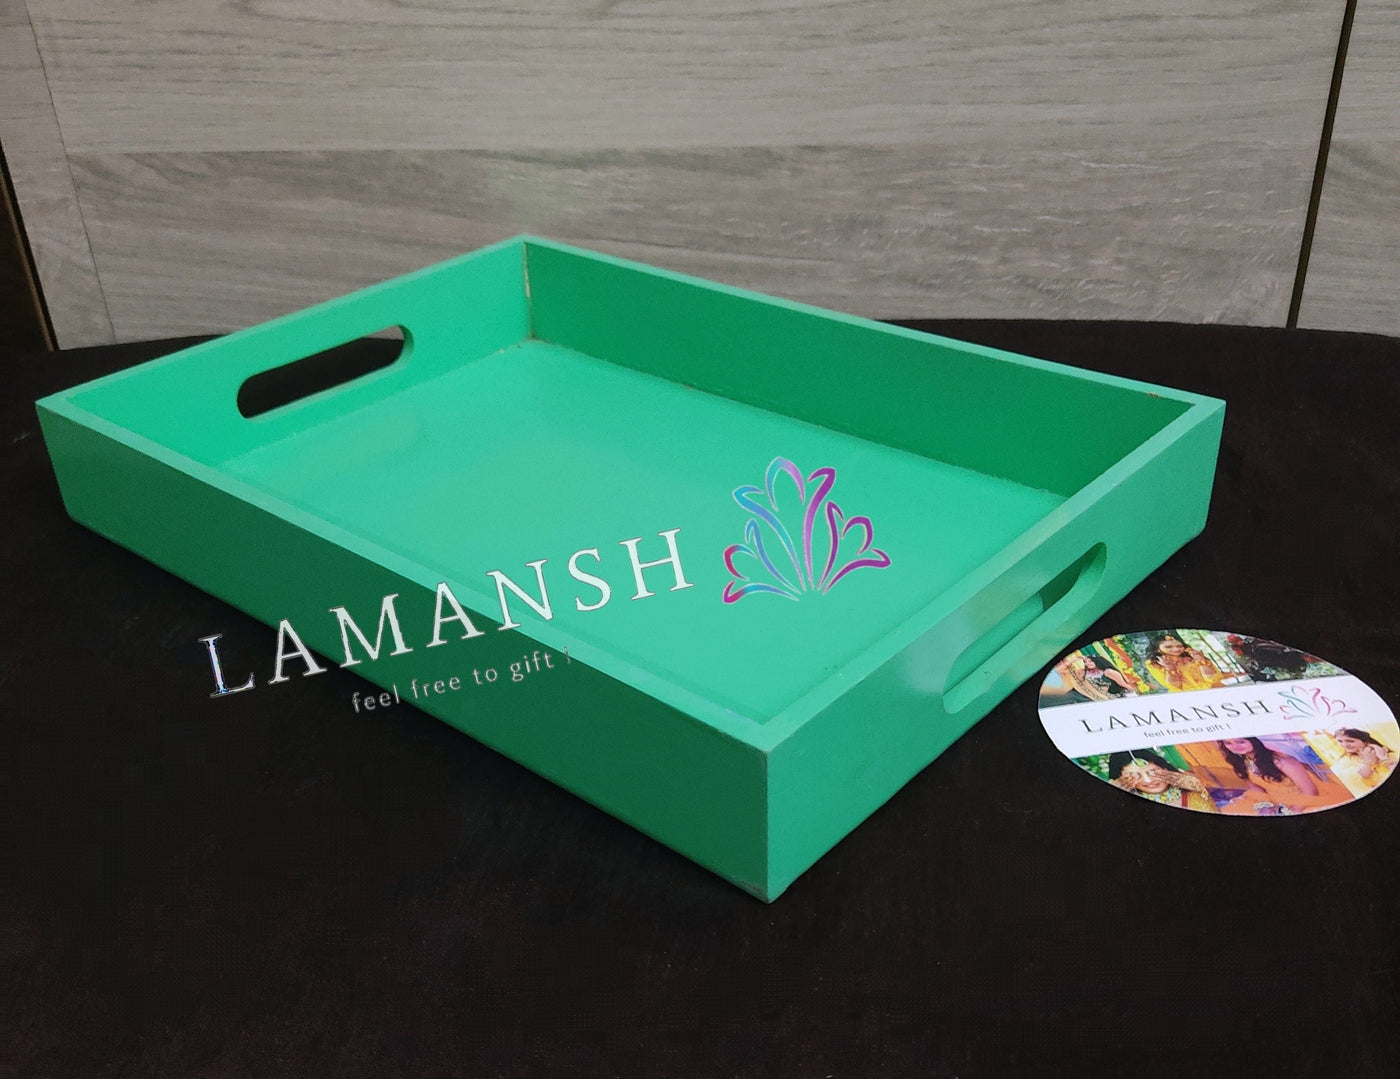 Lamansh pinewood baskets tray LAMANSH® 10×14 inch Rectangle Pinewood Tray for Gifting 🎁 & Giveaways Tray platter for serving & gift packing / Ethnic pinewood basket in assorted colors